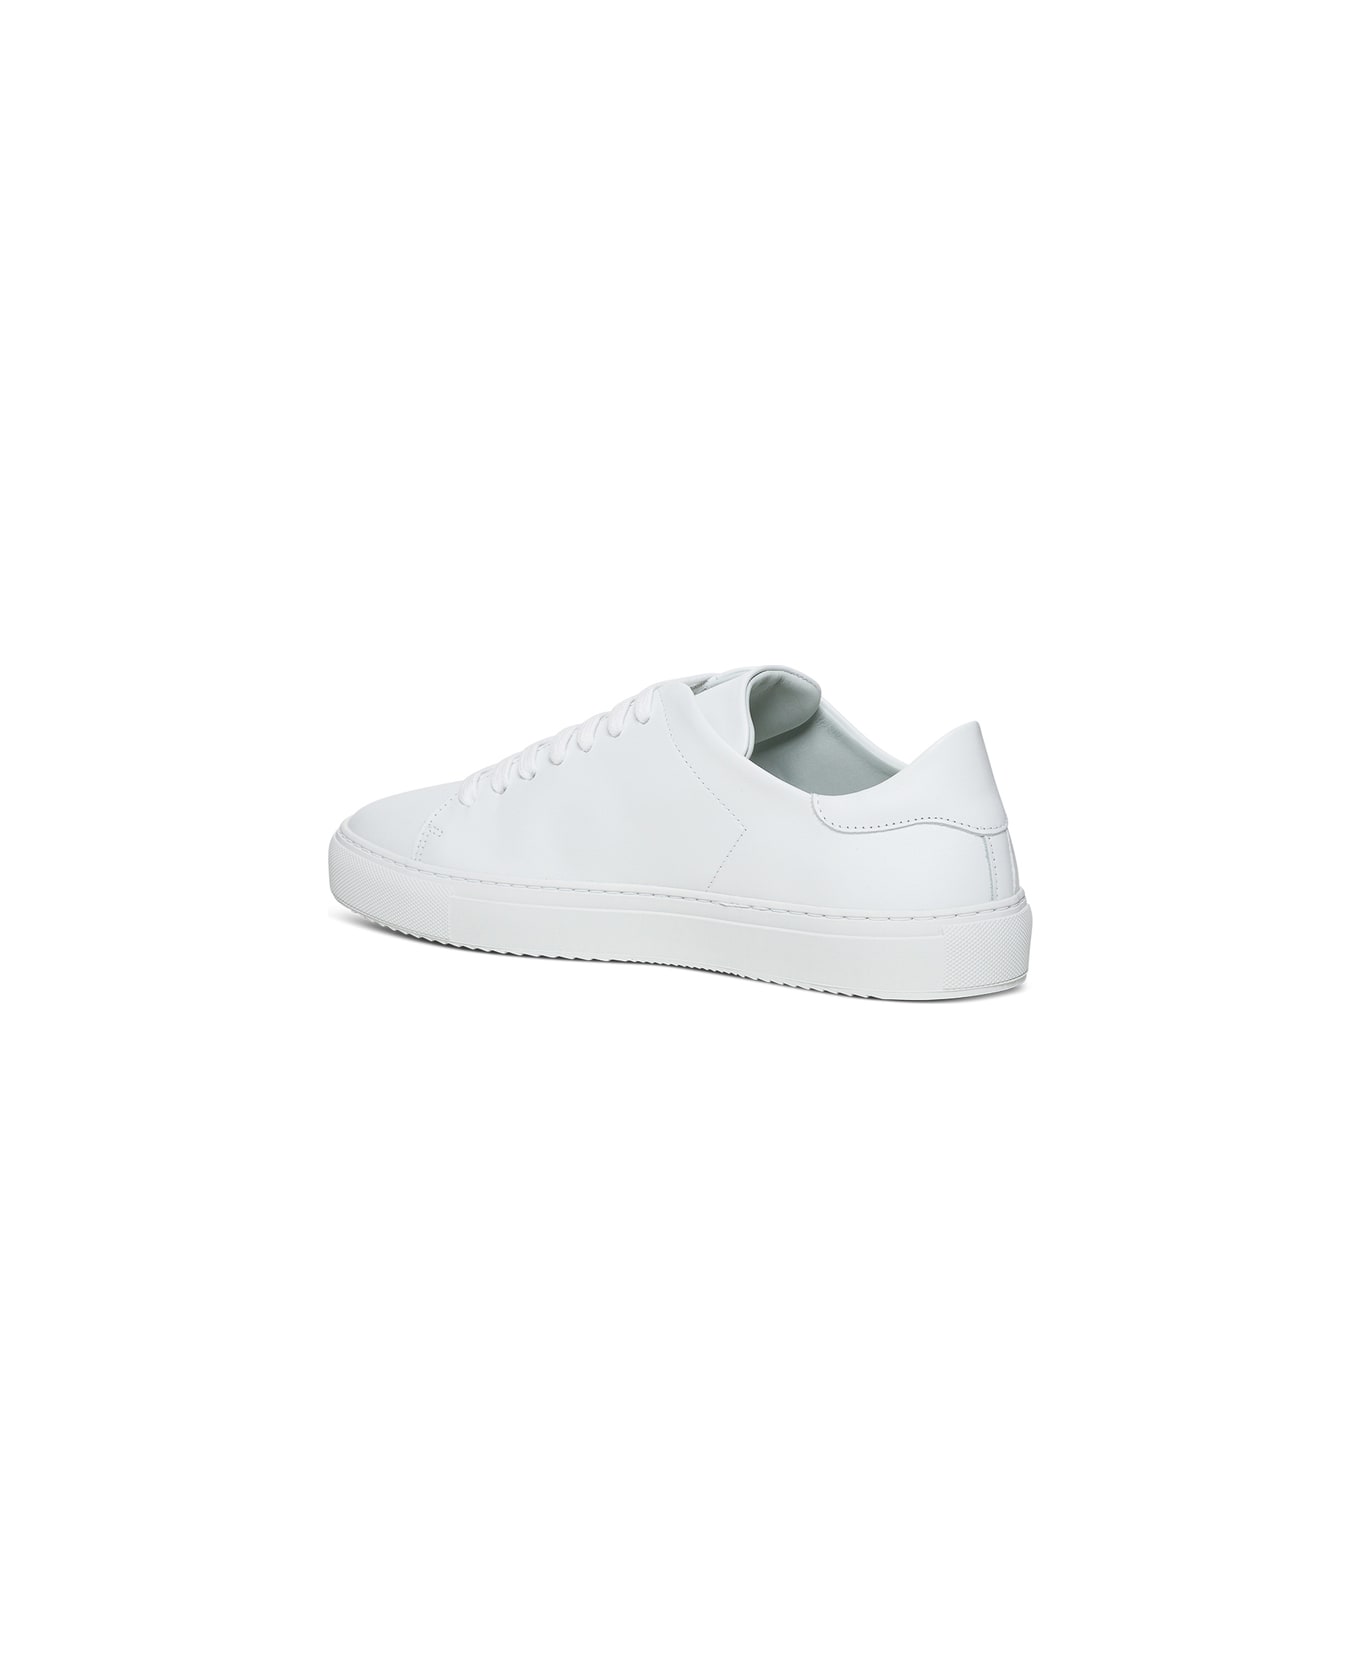 Axel Arigato 'clean 90' White Sneakers With Printed Logo In Leather Man Axel Arigato - White スニーカー